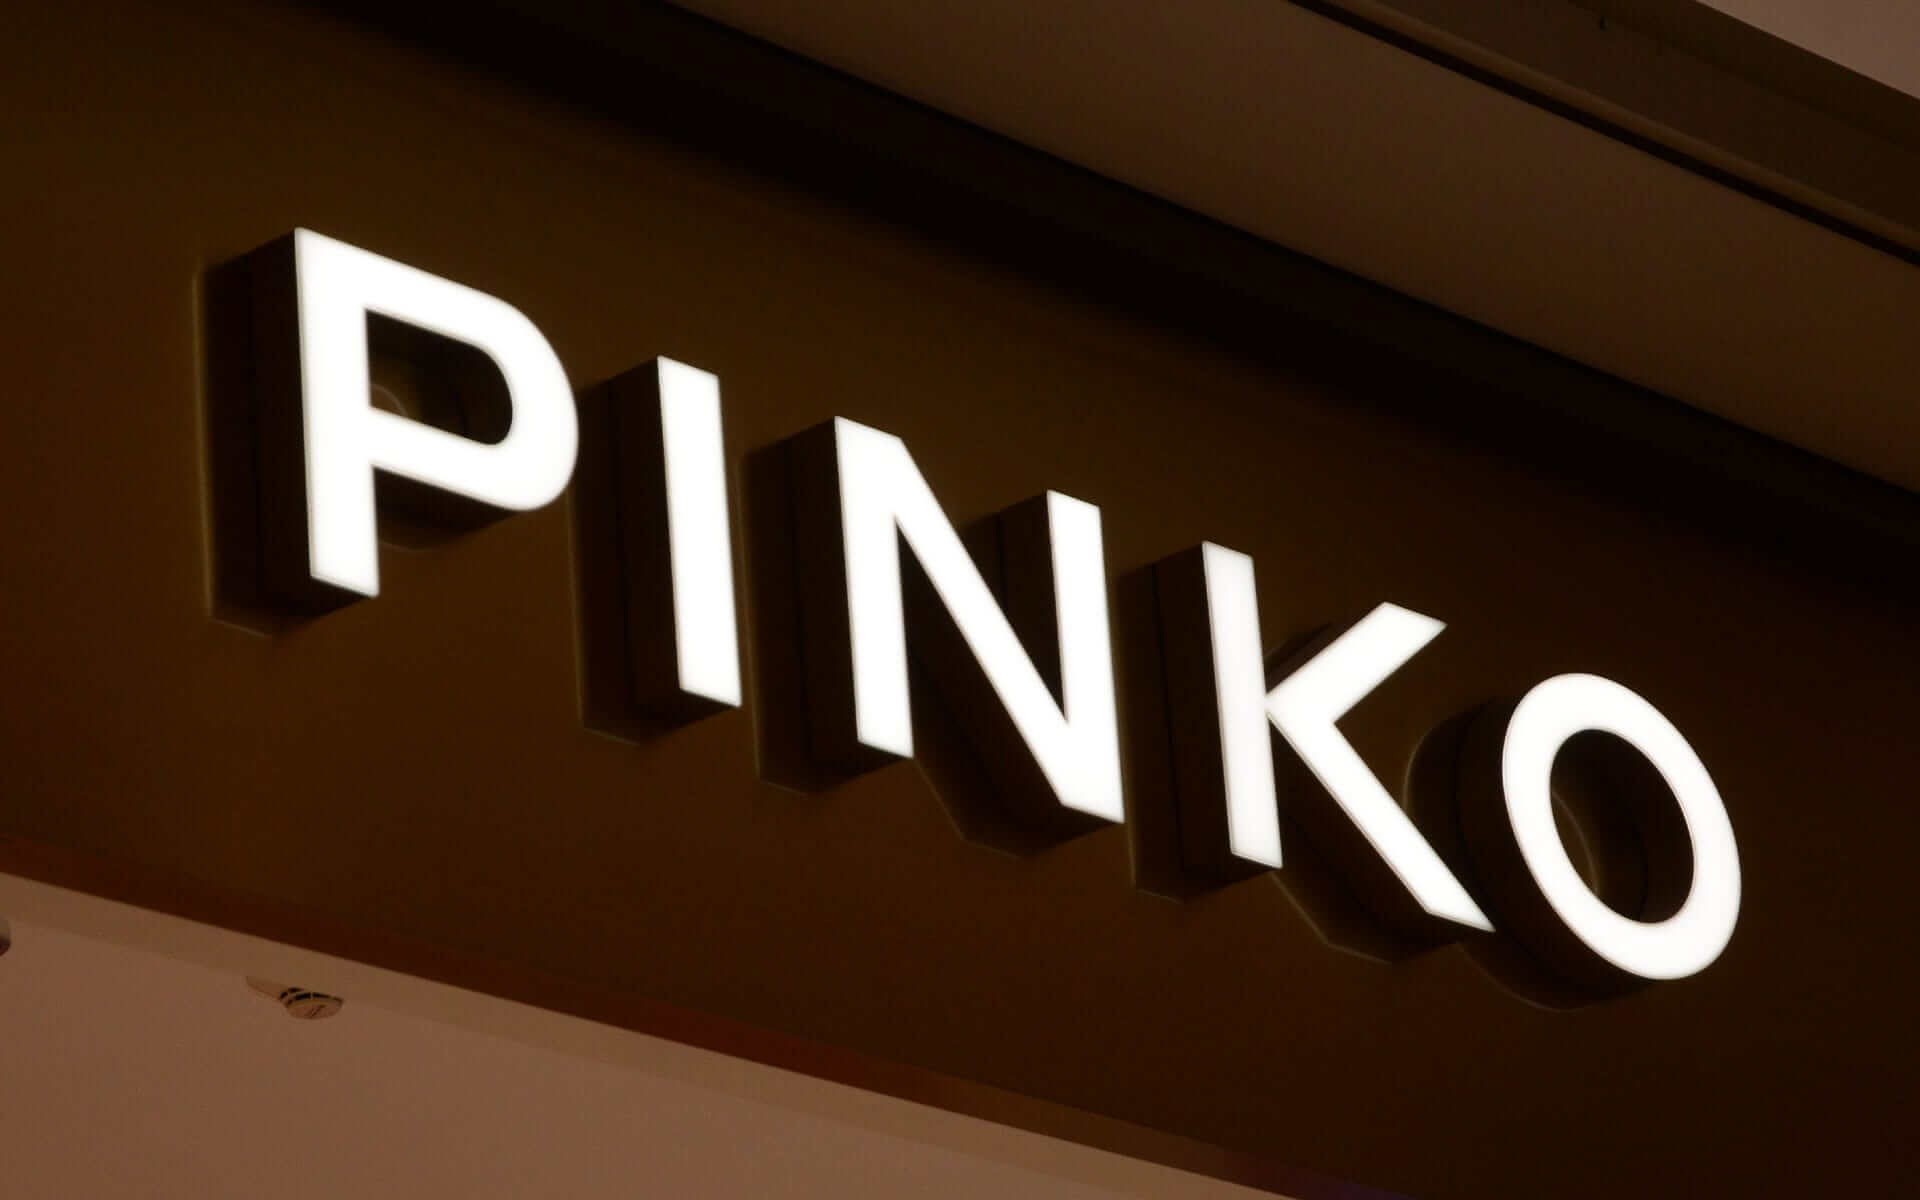 Trimless Face-lit Metal Channel Letters for Pinko